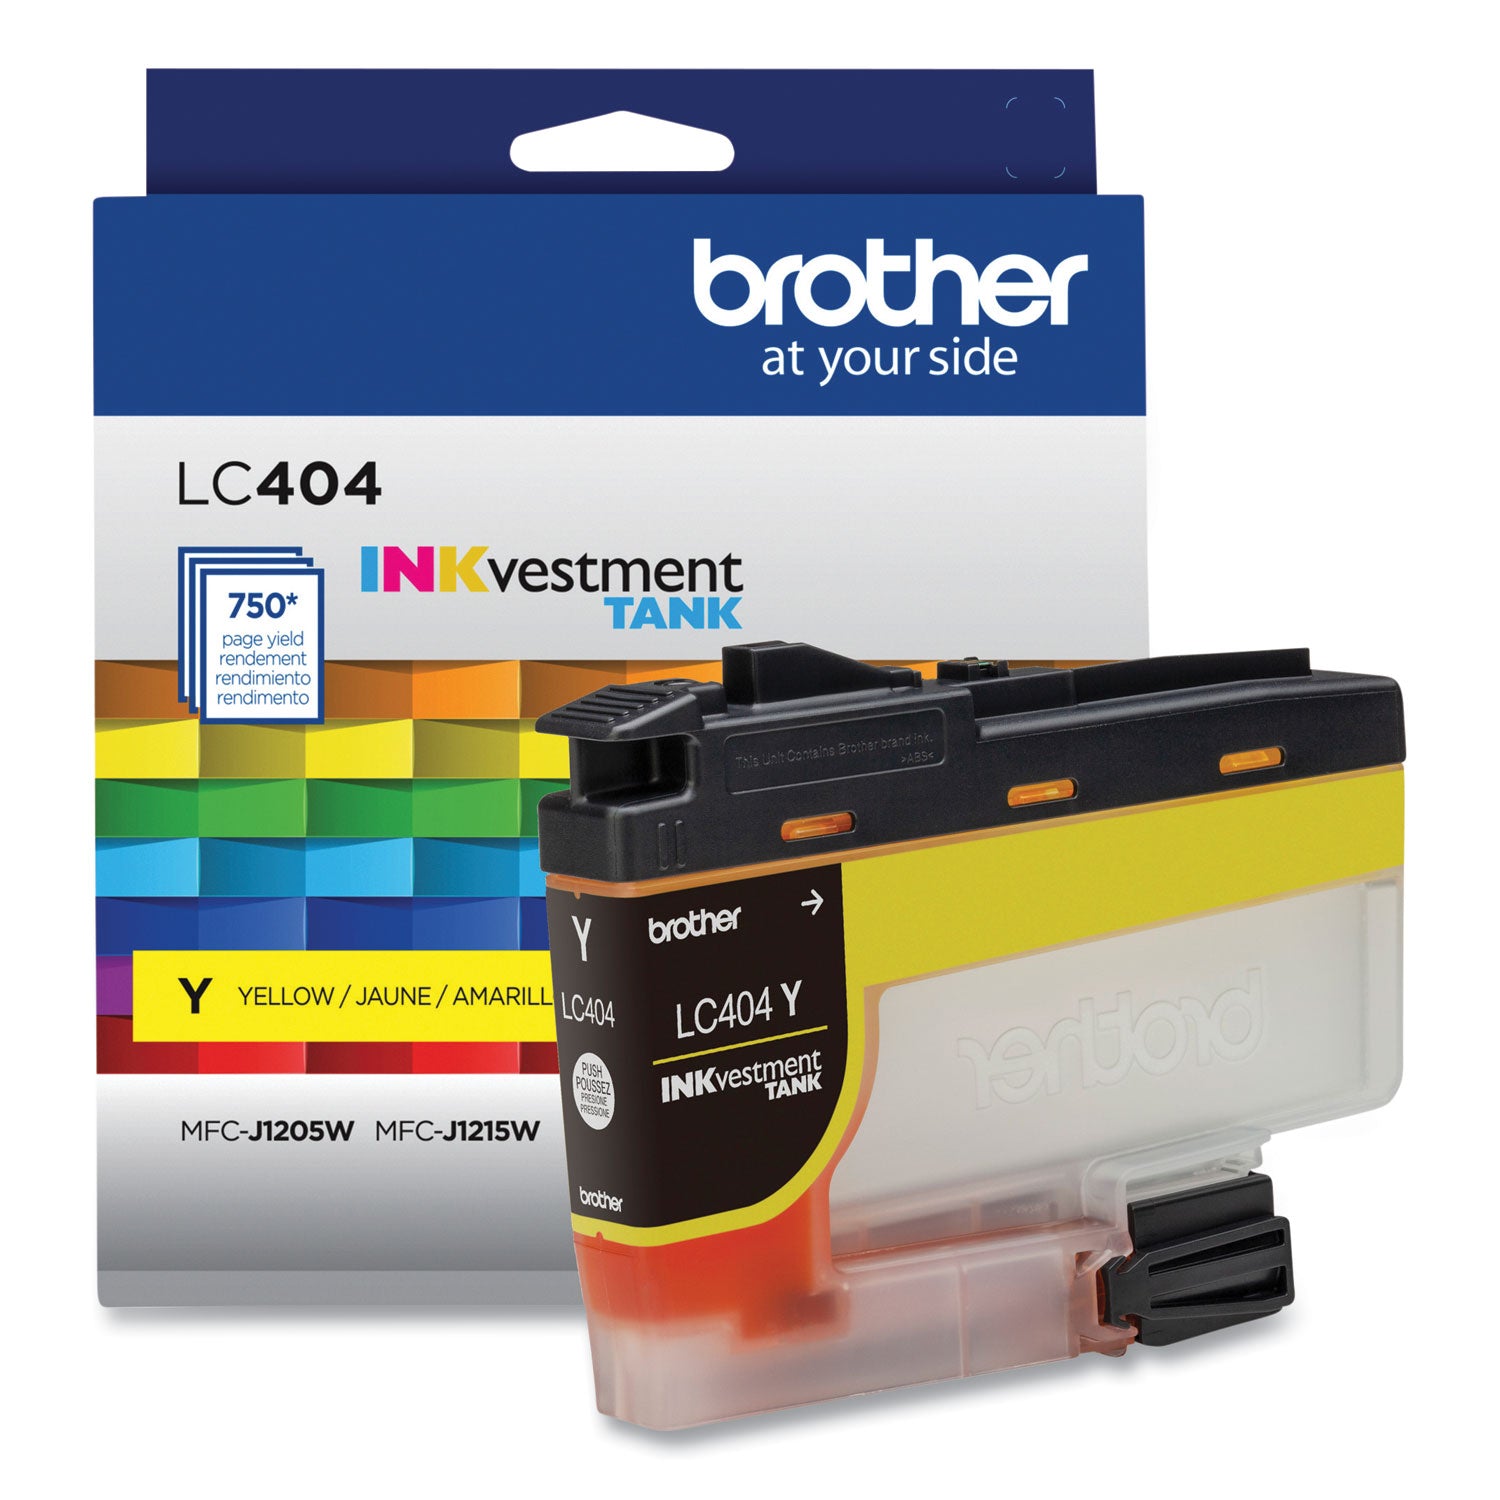 lc404ys-inkvestment-ink-750-page-yield-yellow_brtlc404ys - 4